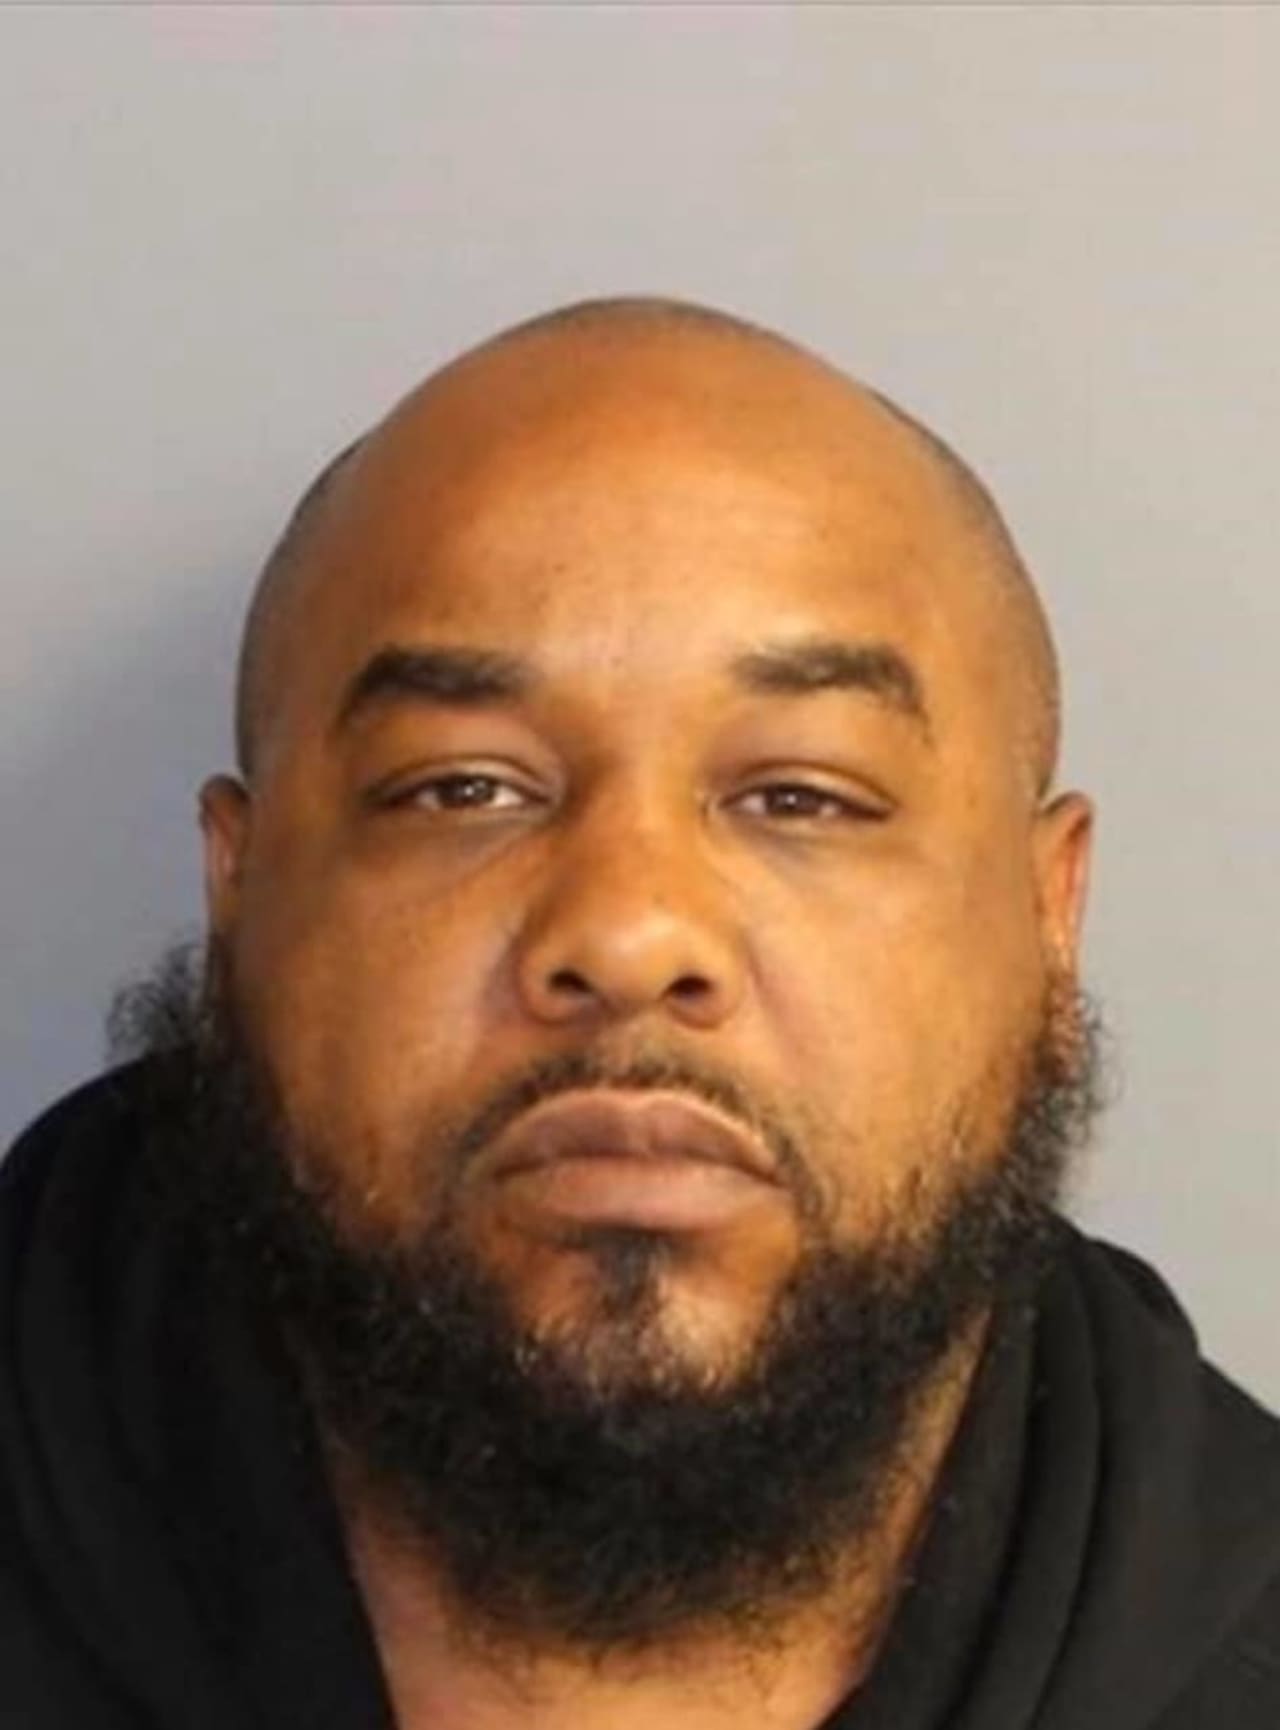 A warrant has been issued for the arrest of Christopher Smith, 41, who is being charged with contempt, violation of a restraining order and burglary, police say.